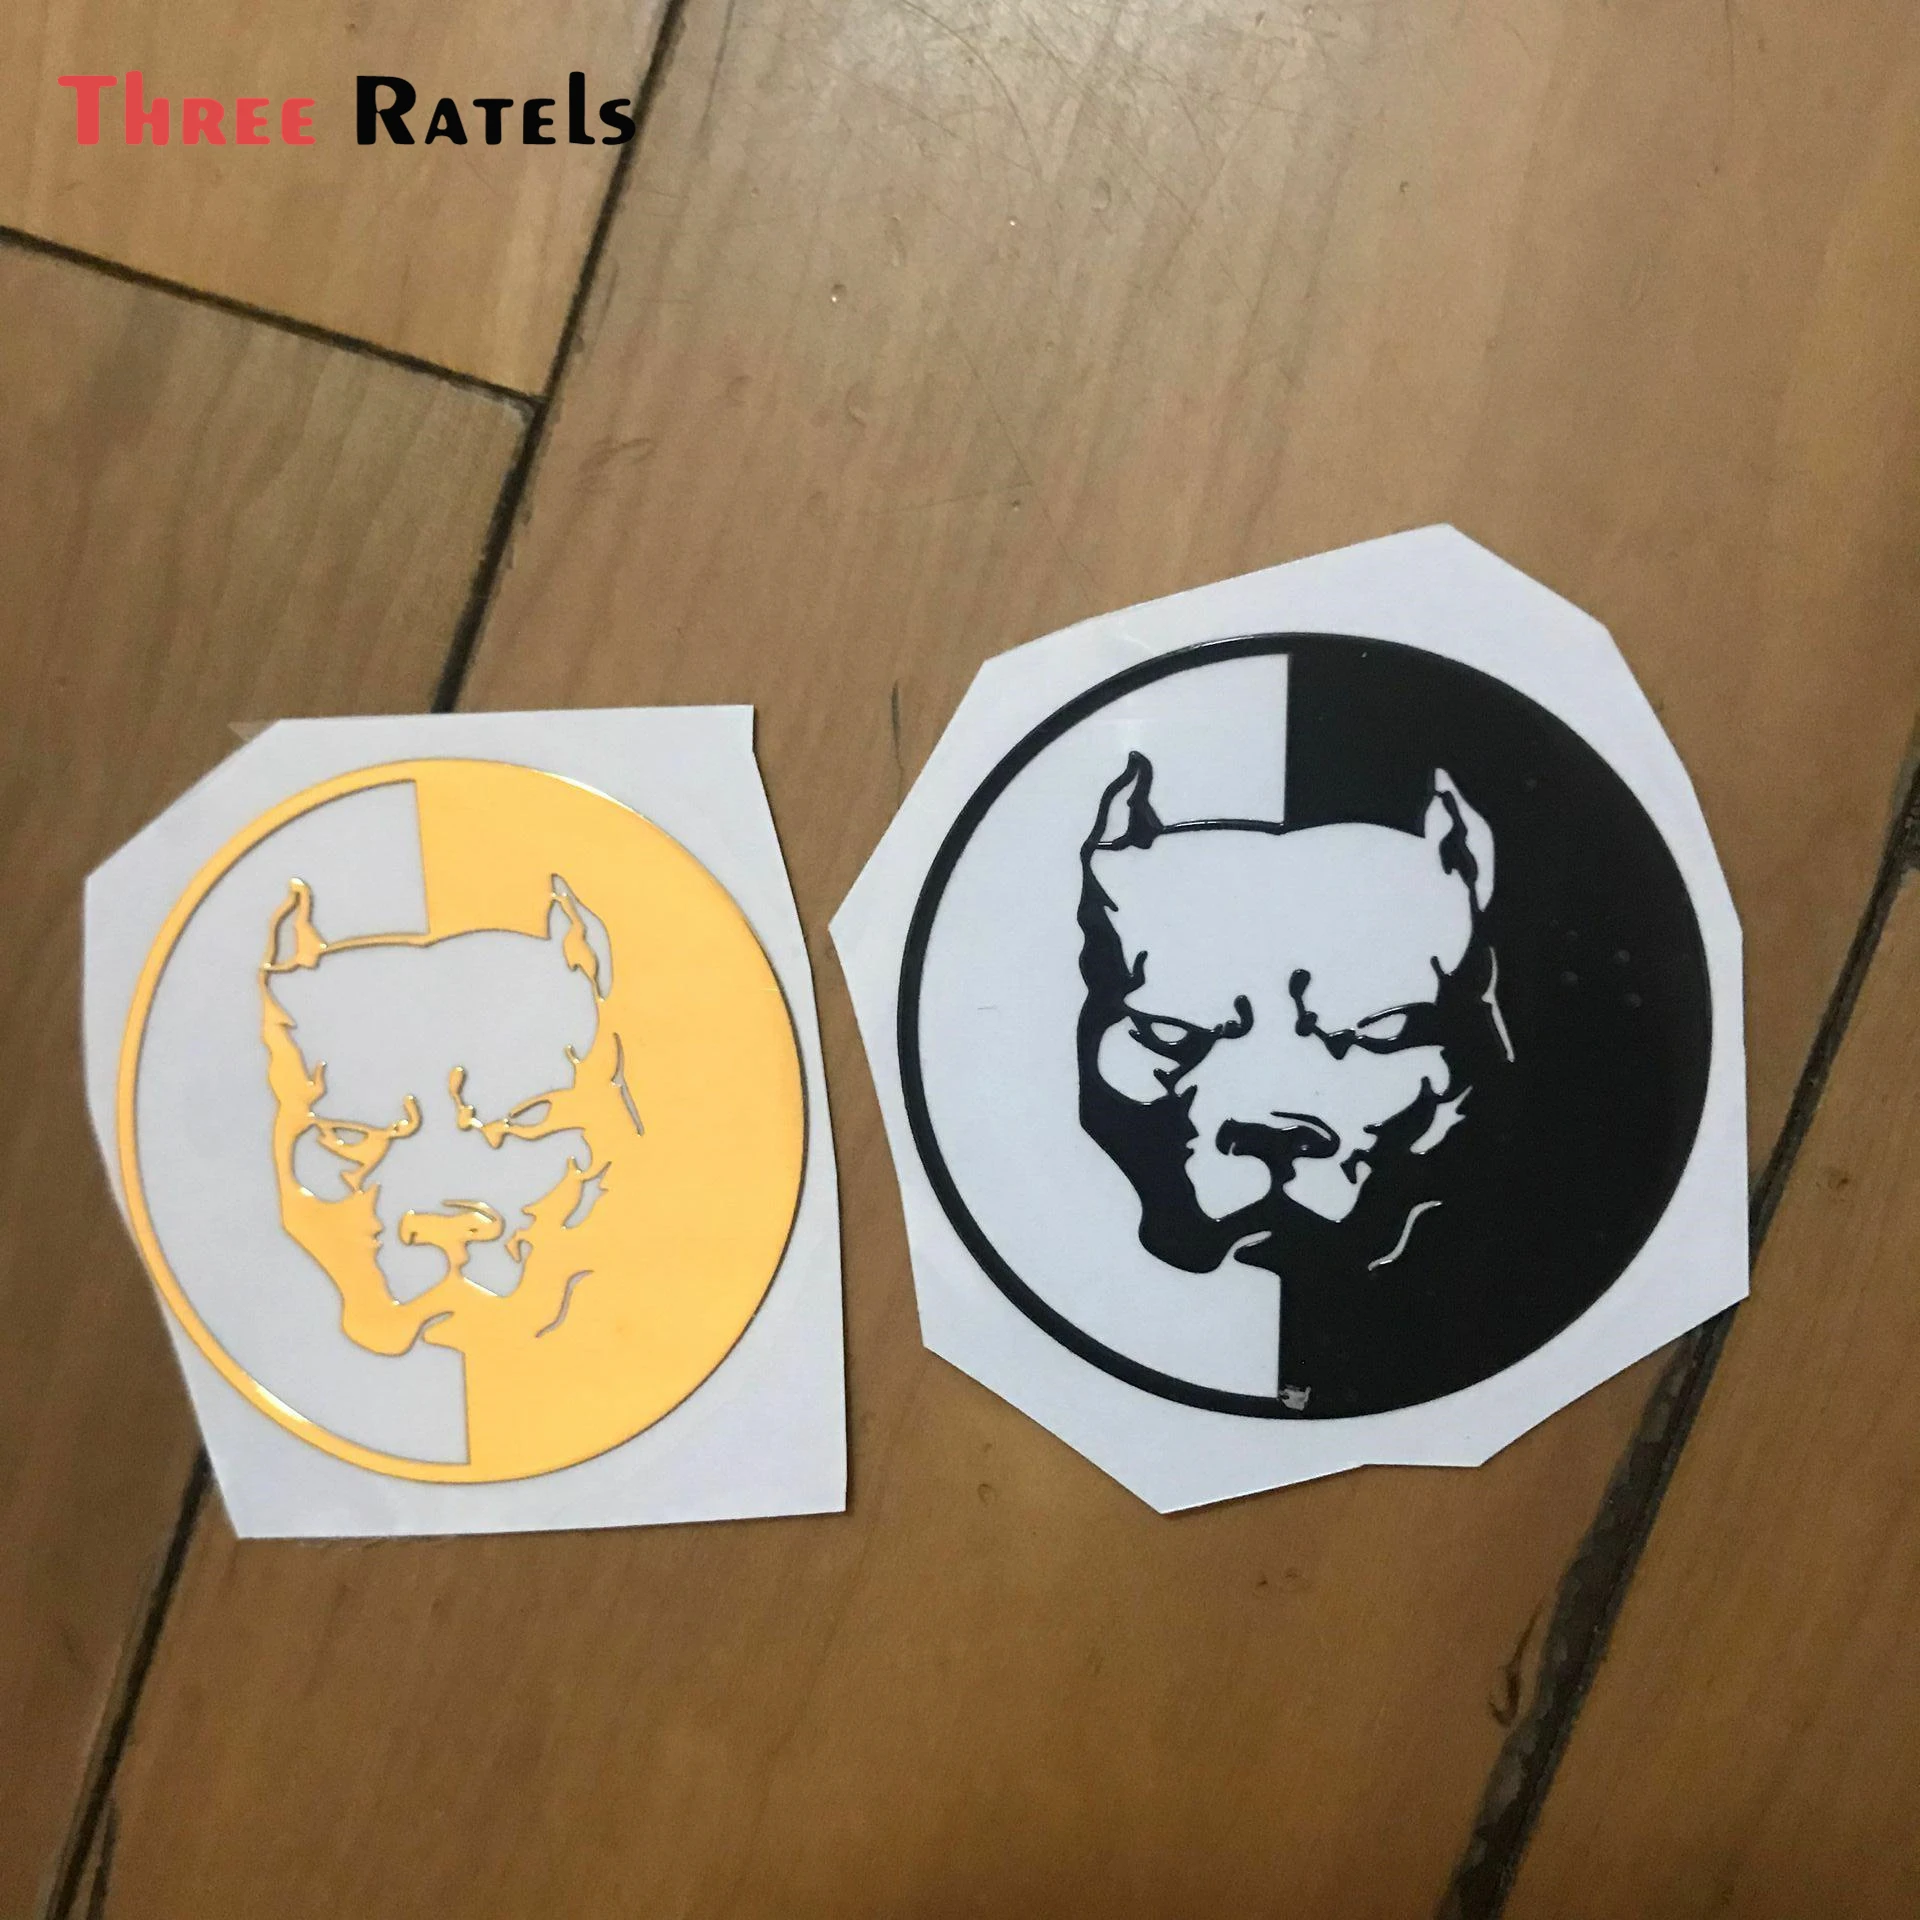 

Three Ratel cool MT-68 pitbull dog 3D metal sticker decal for Laptop Skateboard Home Decoration Car Scooter Decal